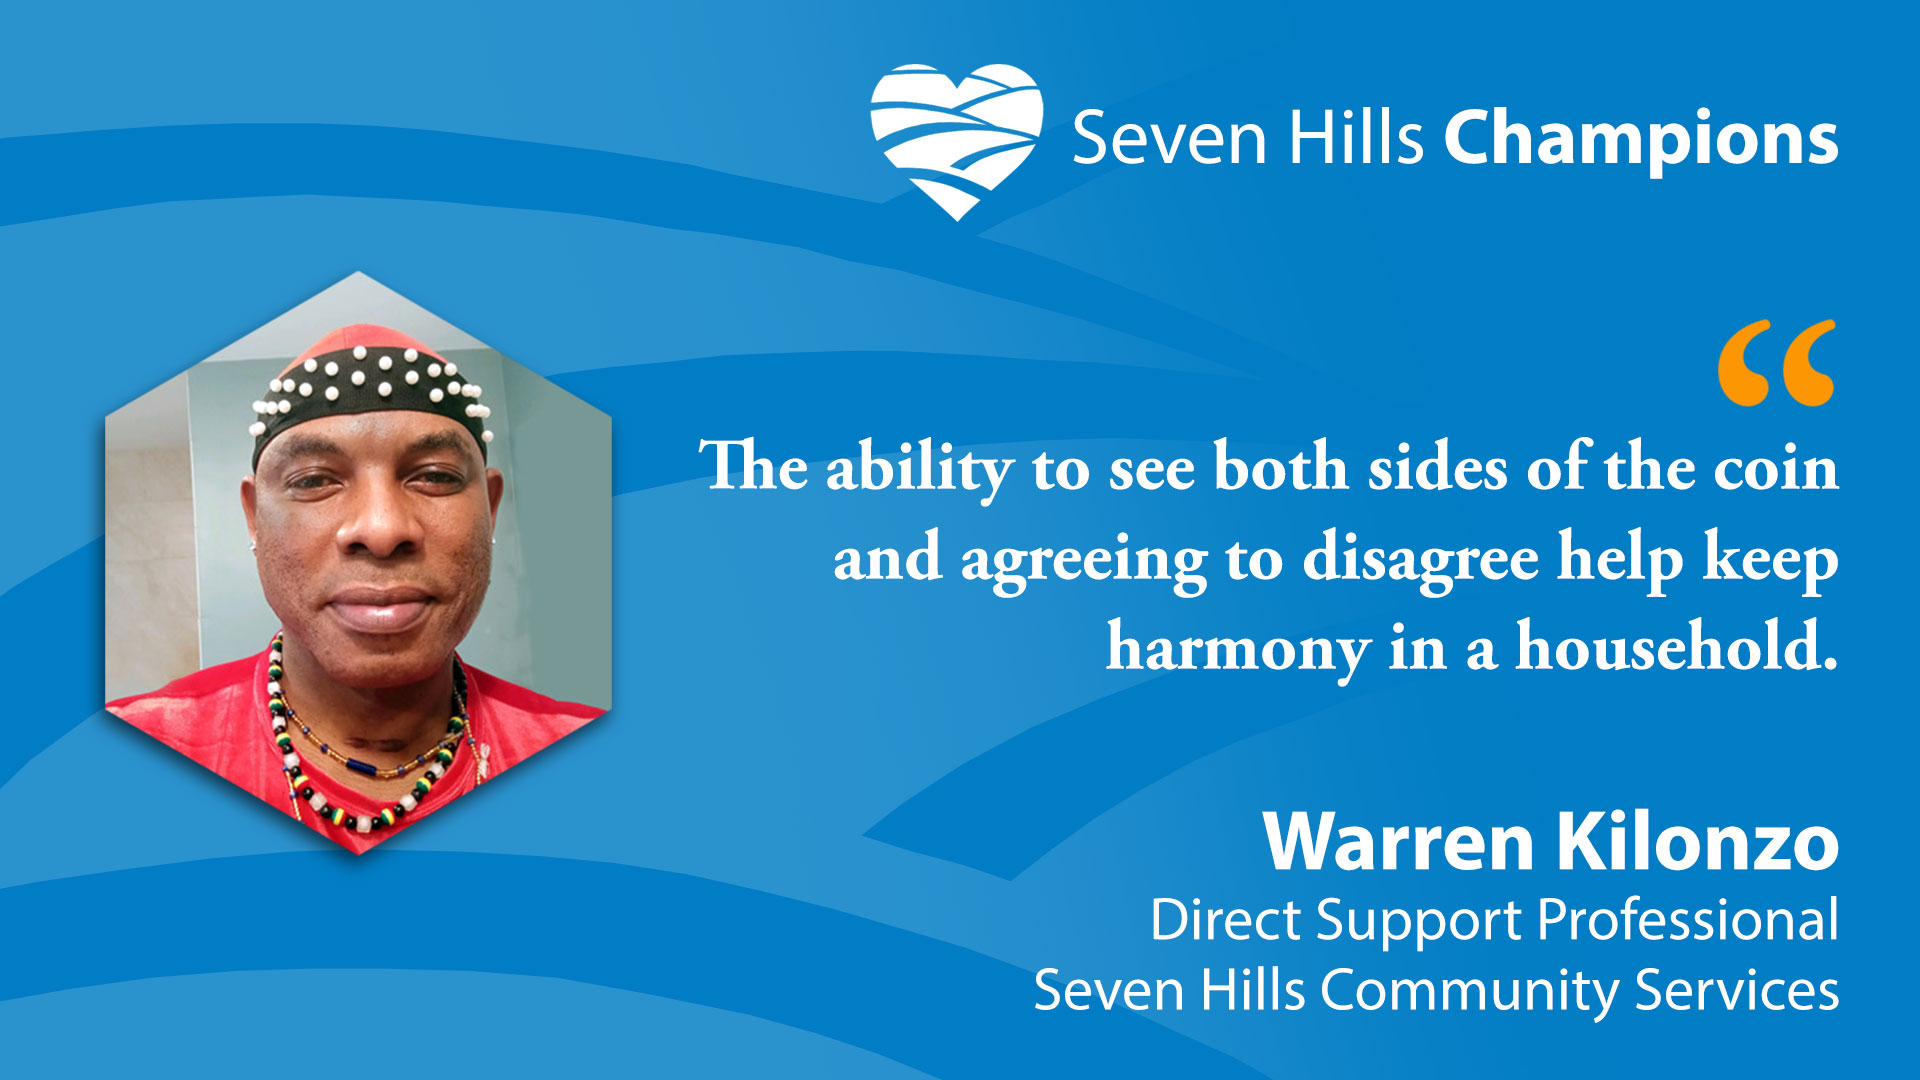 Introducing this Week's Seven Hills Champion, Warren Kilonzo, Direct Support Professional, Seven Hills Community Services